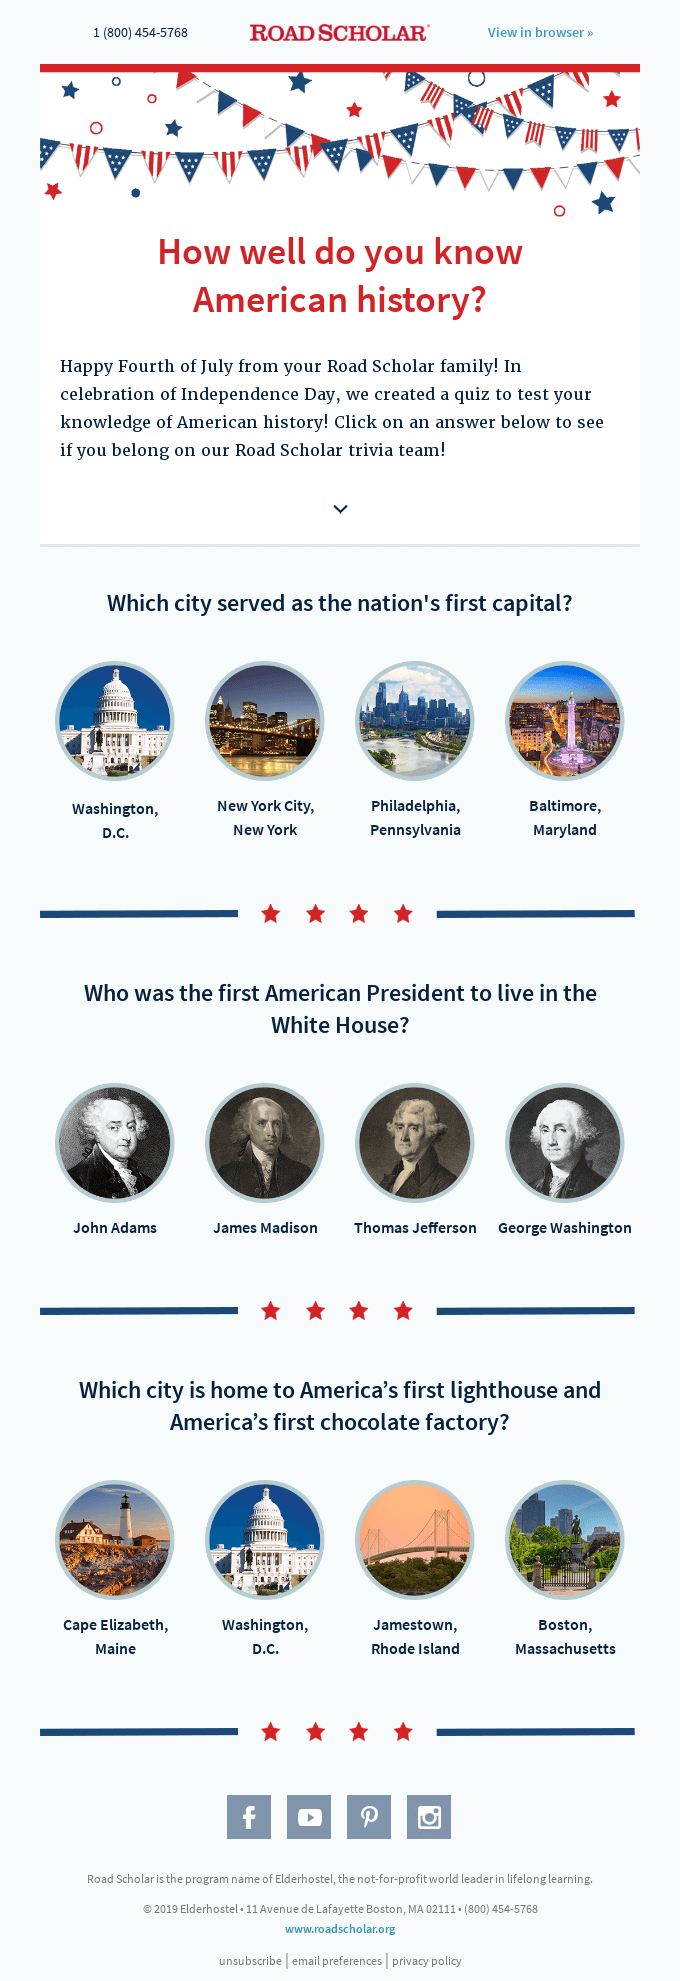 An example of a history quiz survey included in a 4th of July email campaign